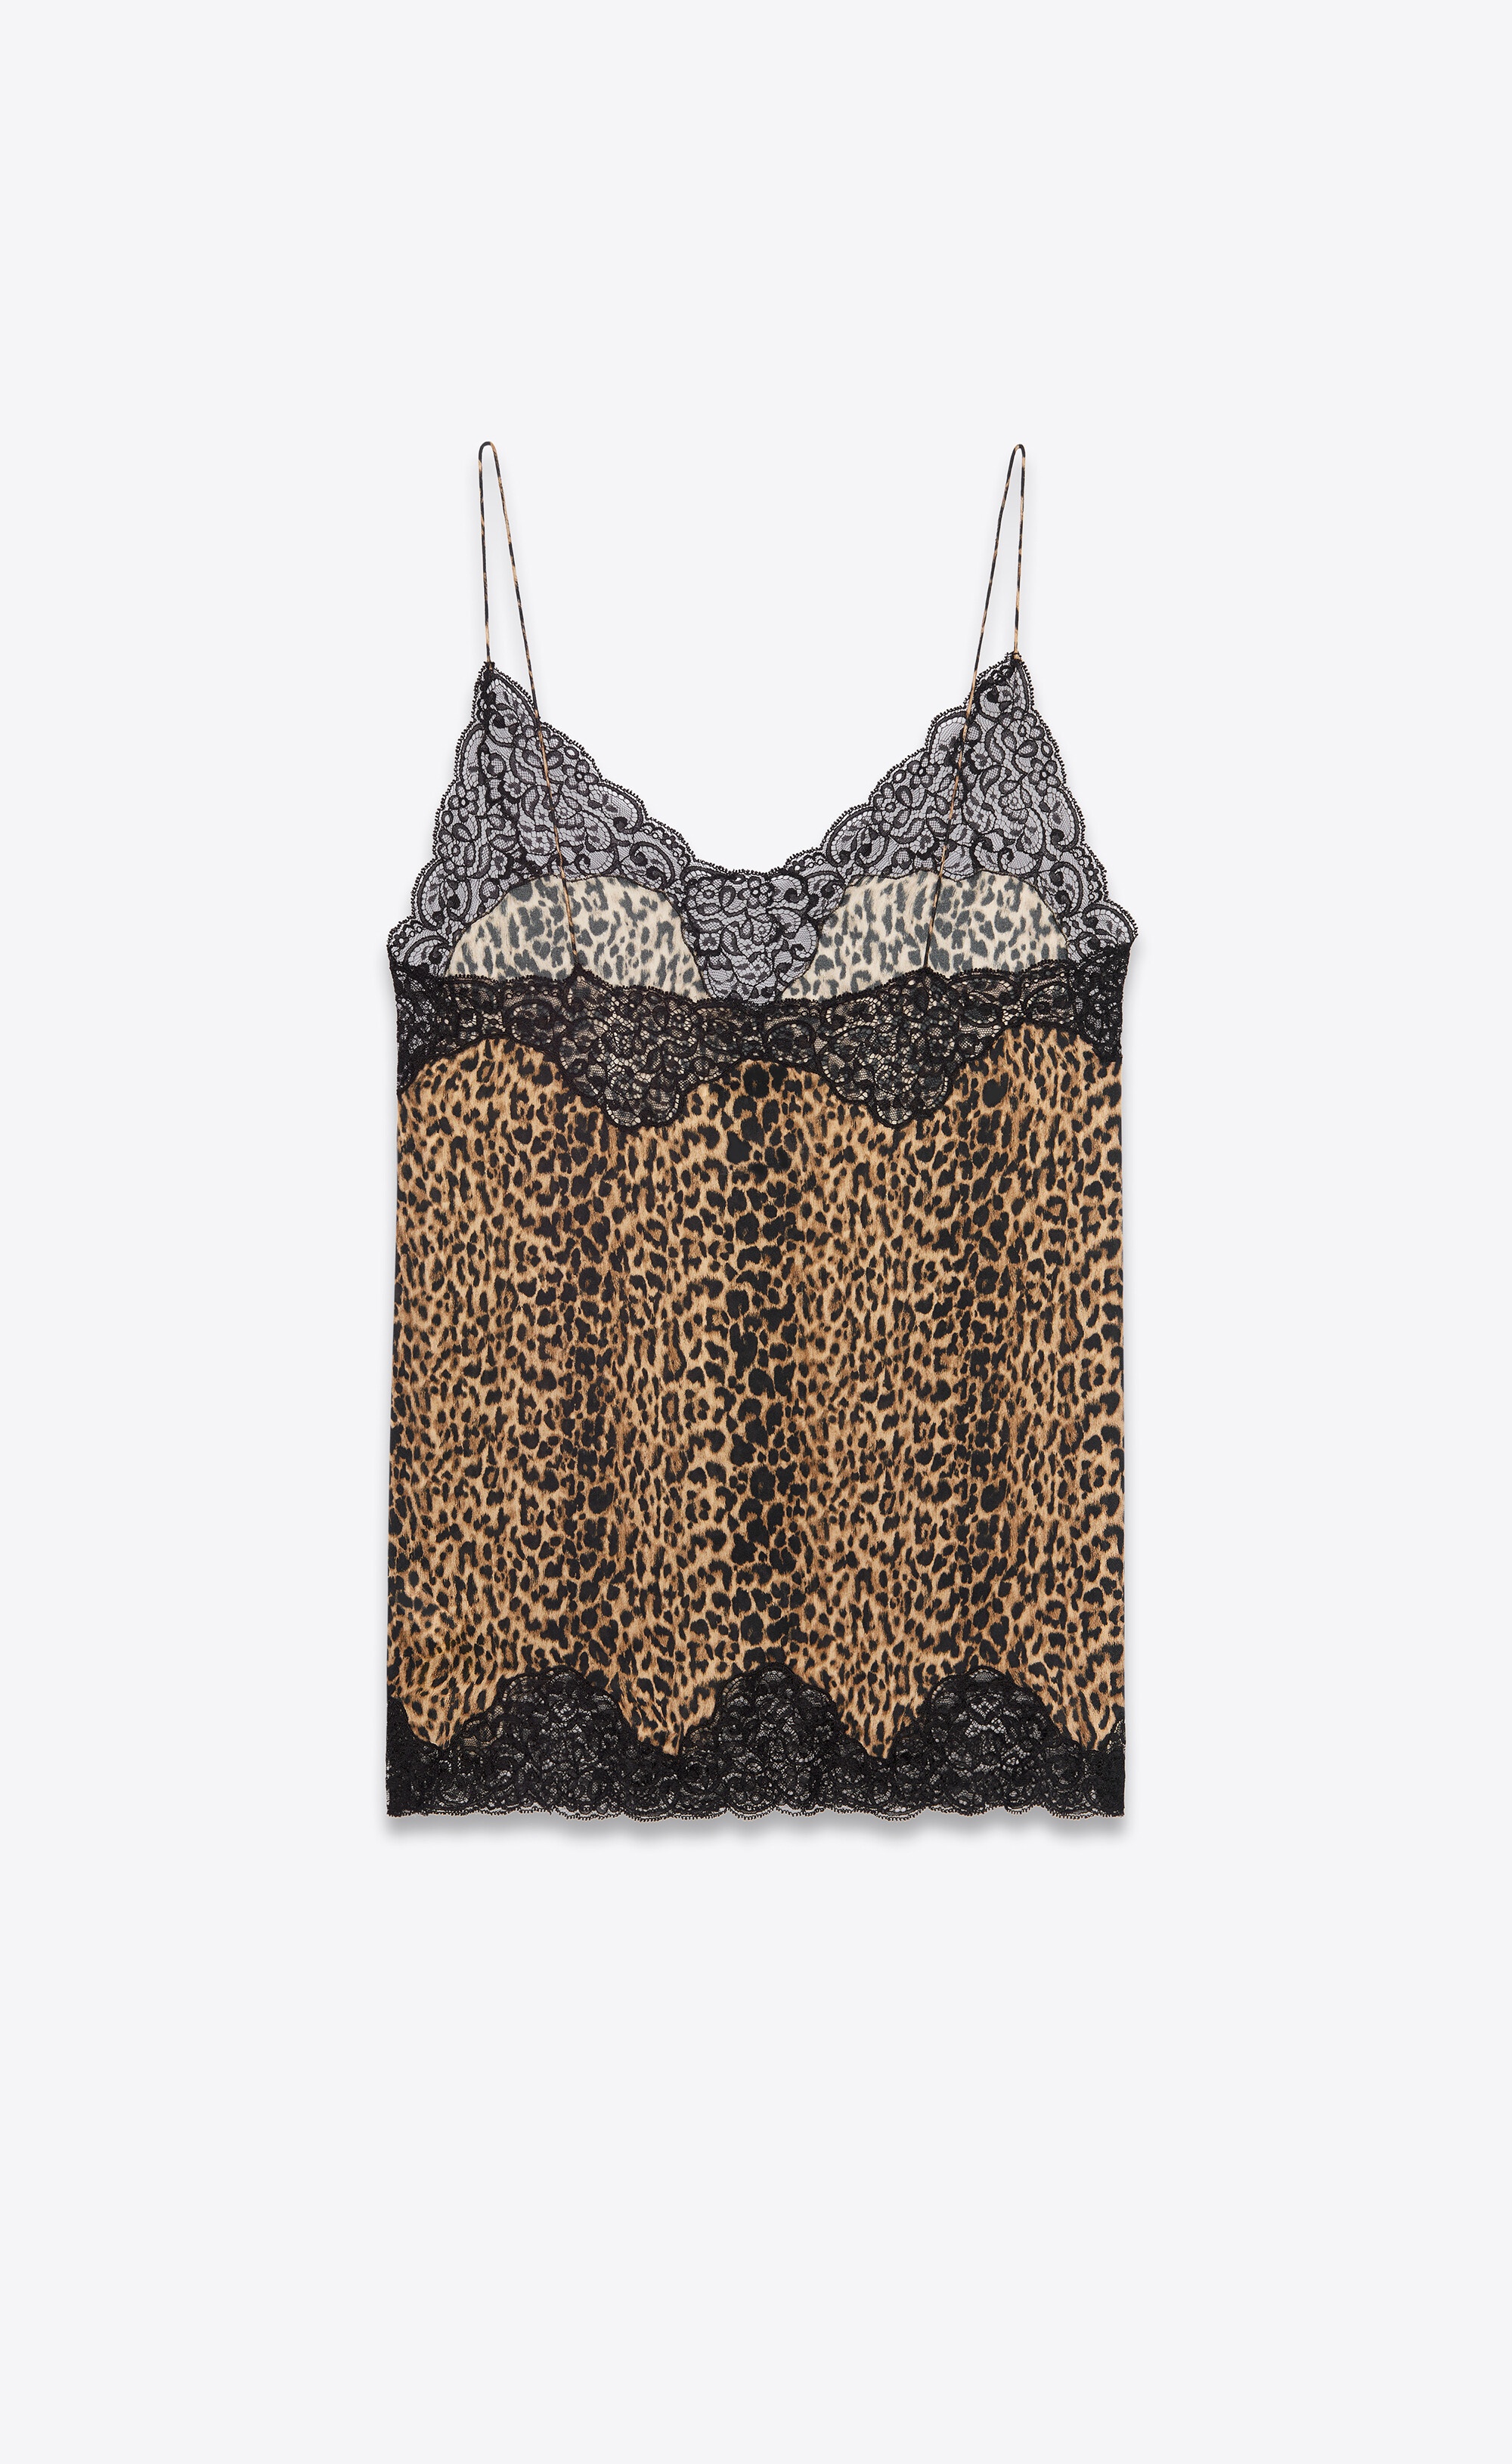 nightgown in leopard-print silk charmeuse and lace - 2